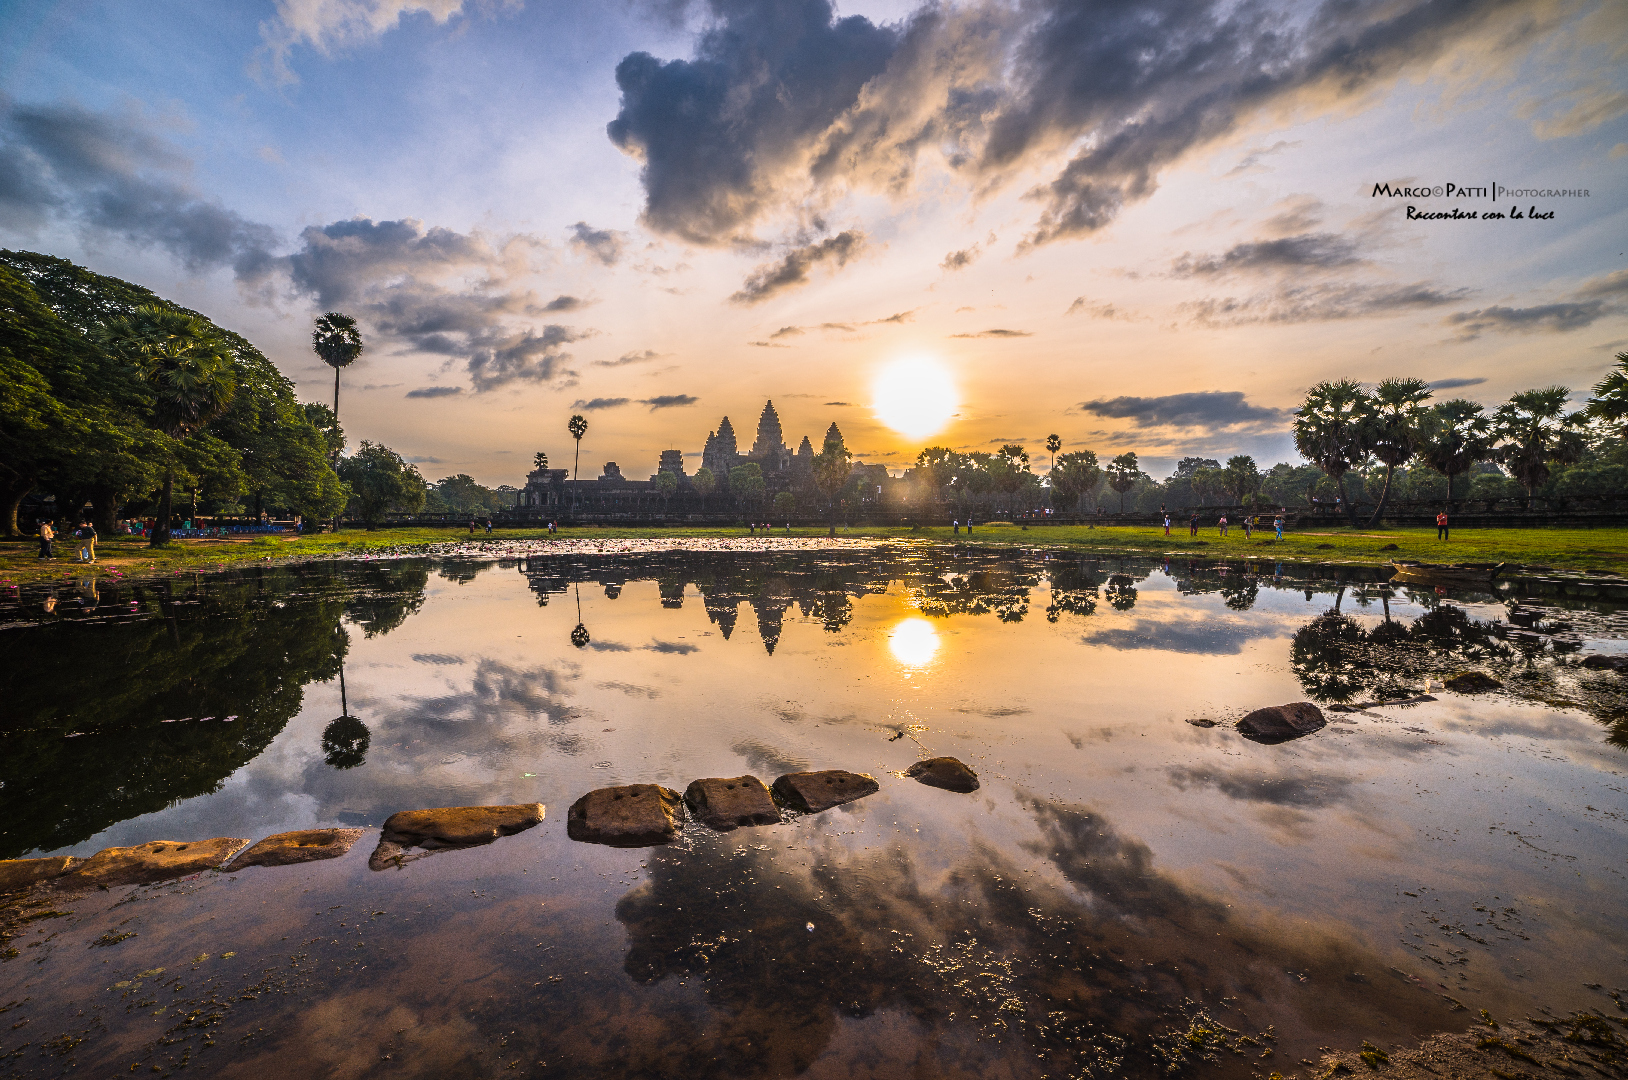 Angkor Wat, the largest religious site in the world...